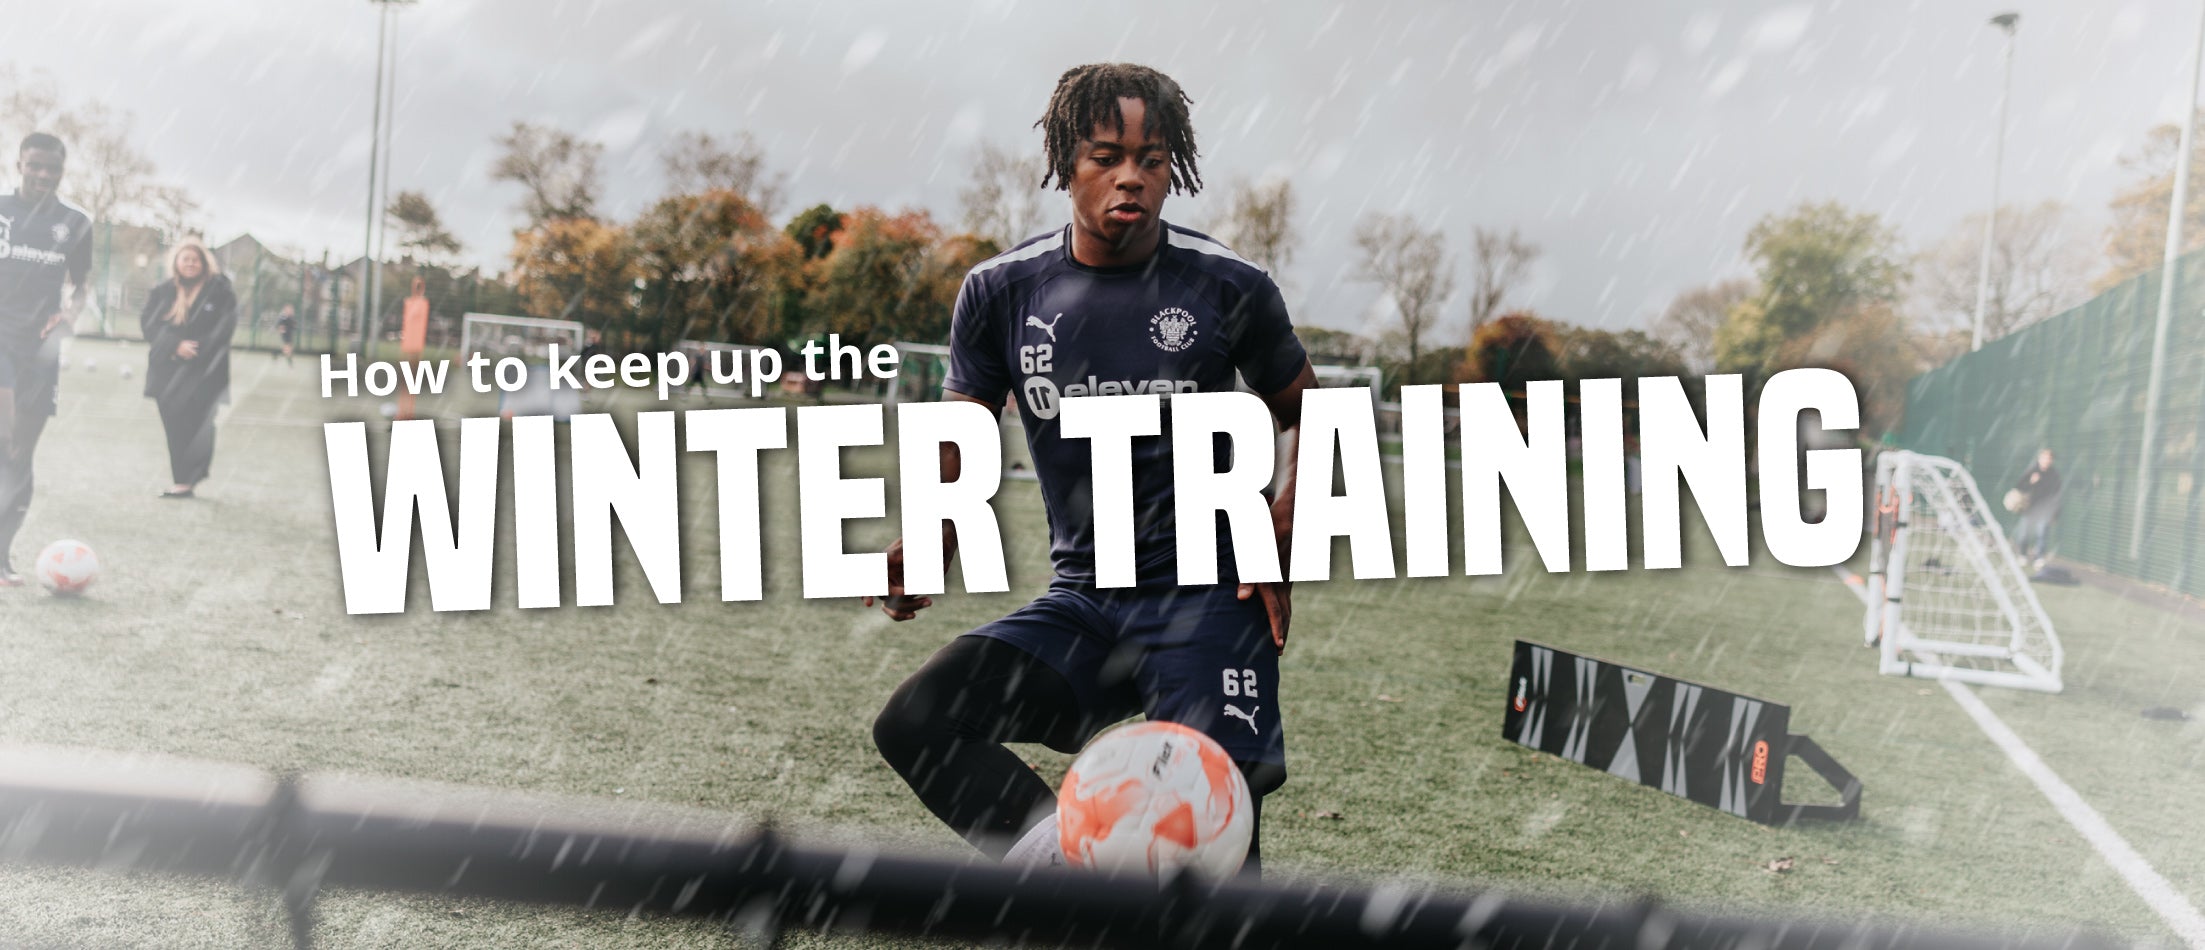 How to keep training in the winter months